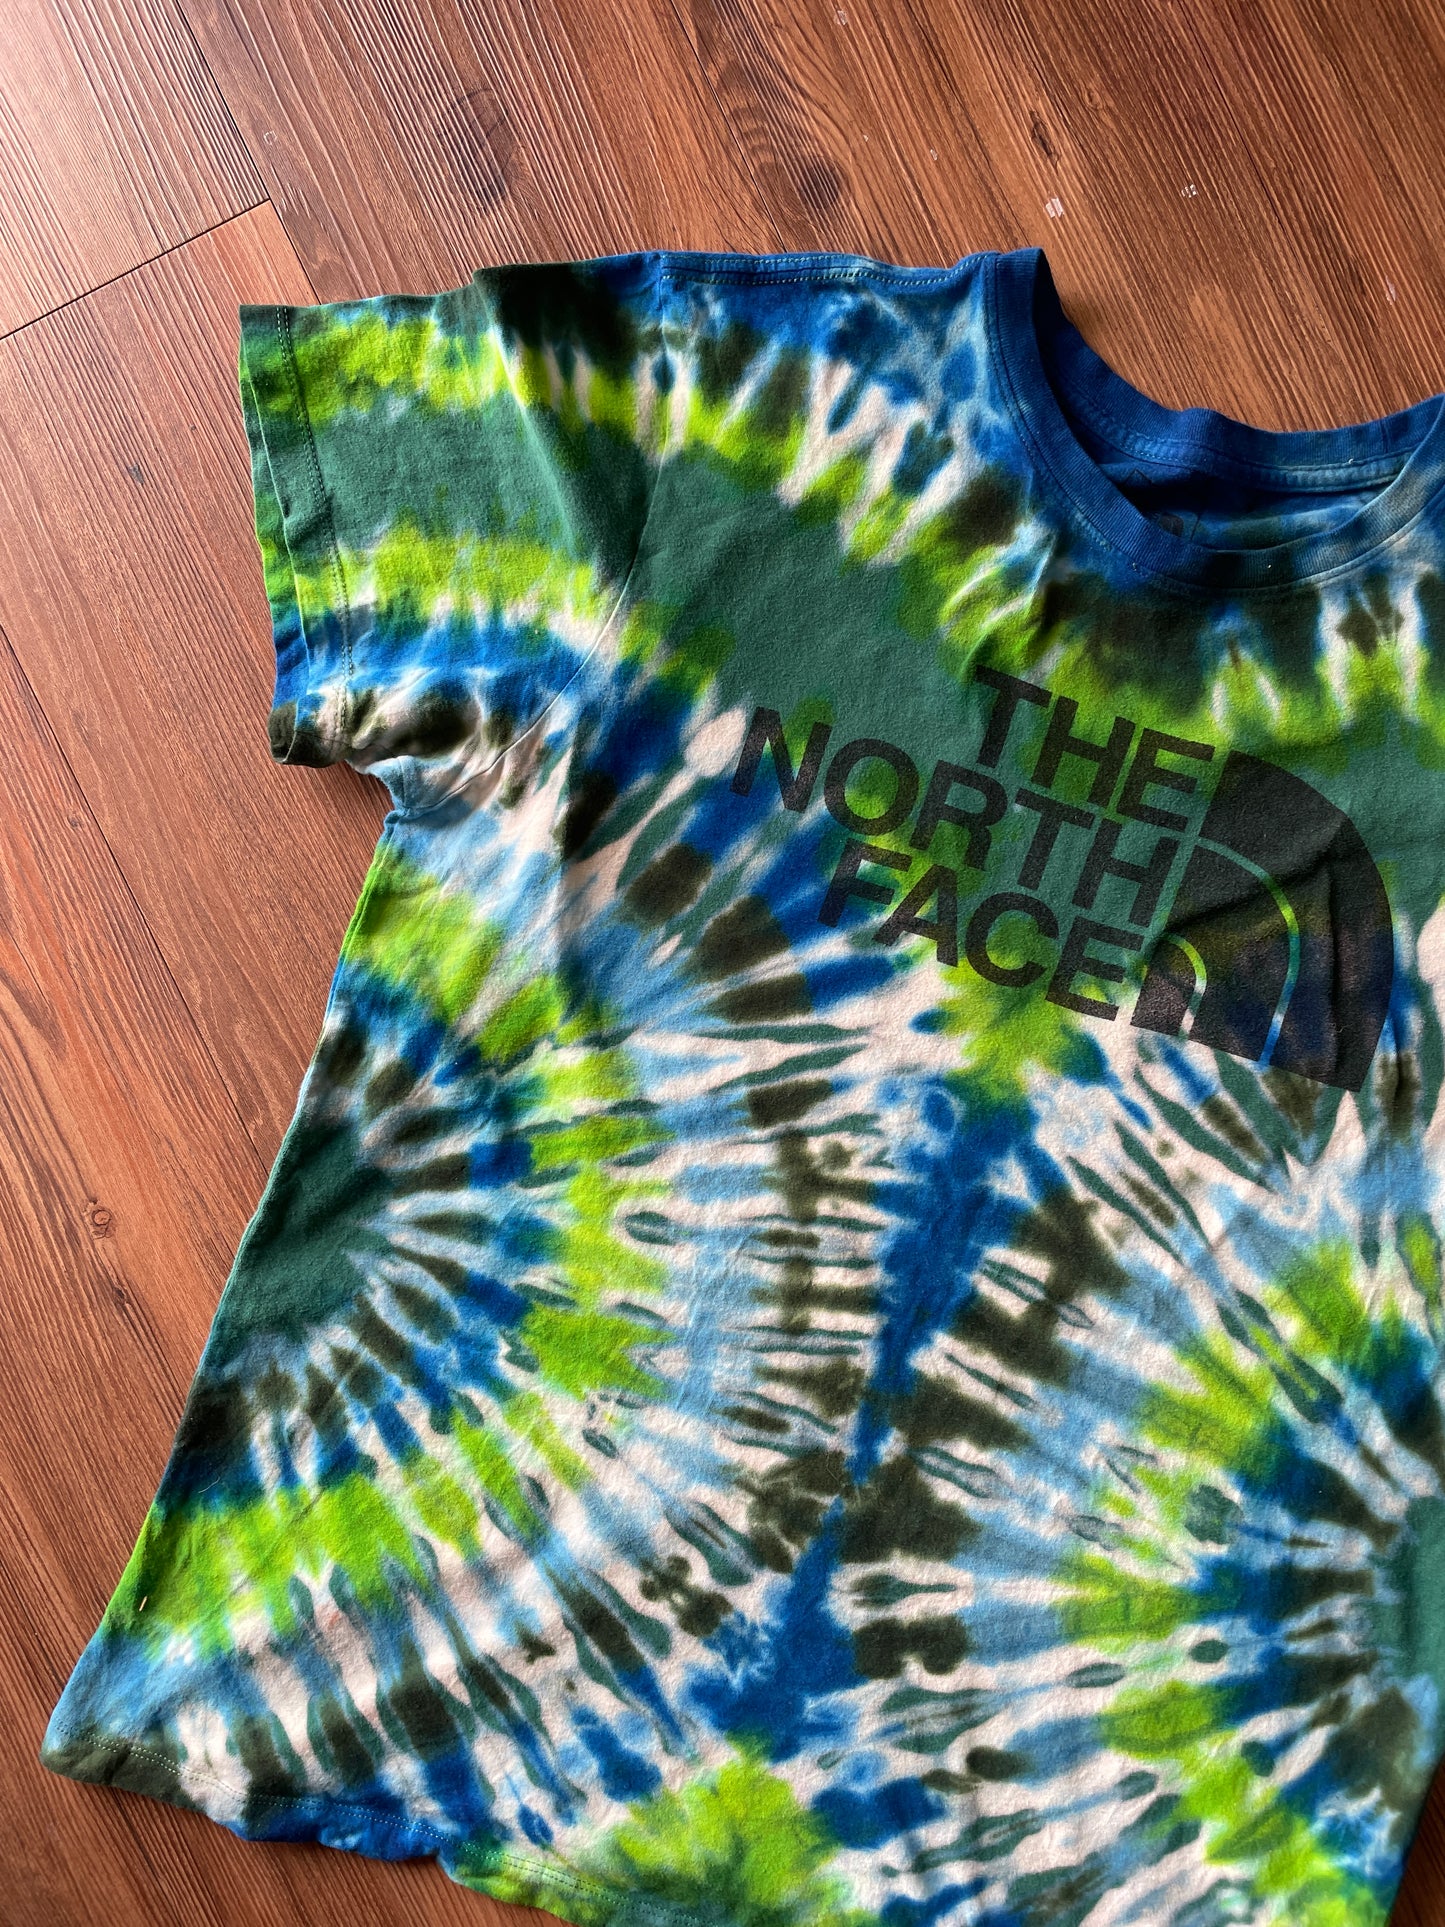 LARGE Men’s The North Face Half Dome Tie Dye T-Shirt | Green White and Blue TNF Reverse Tie Dye Short Sleeve